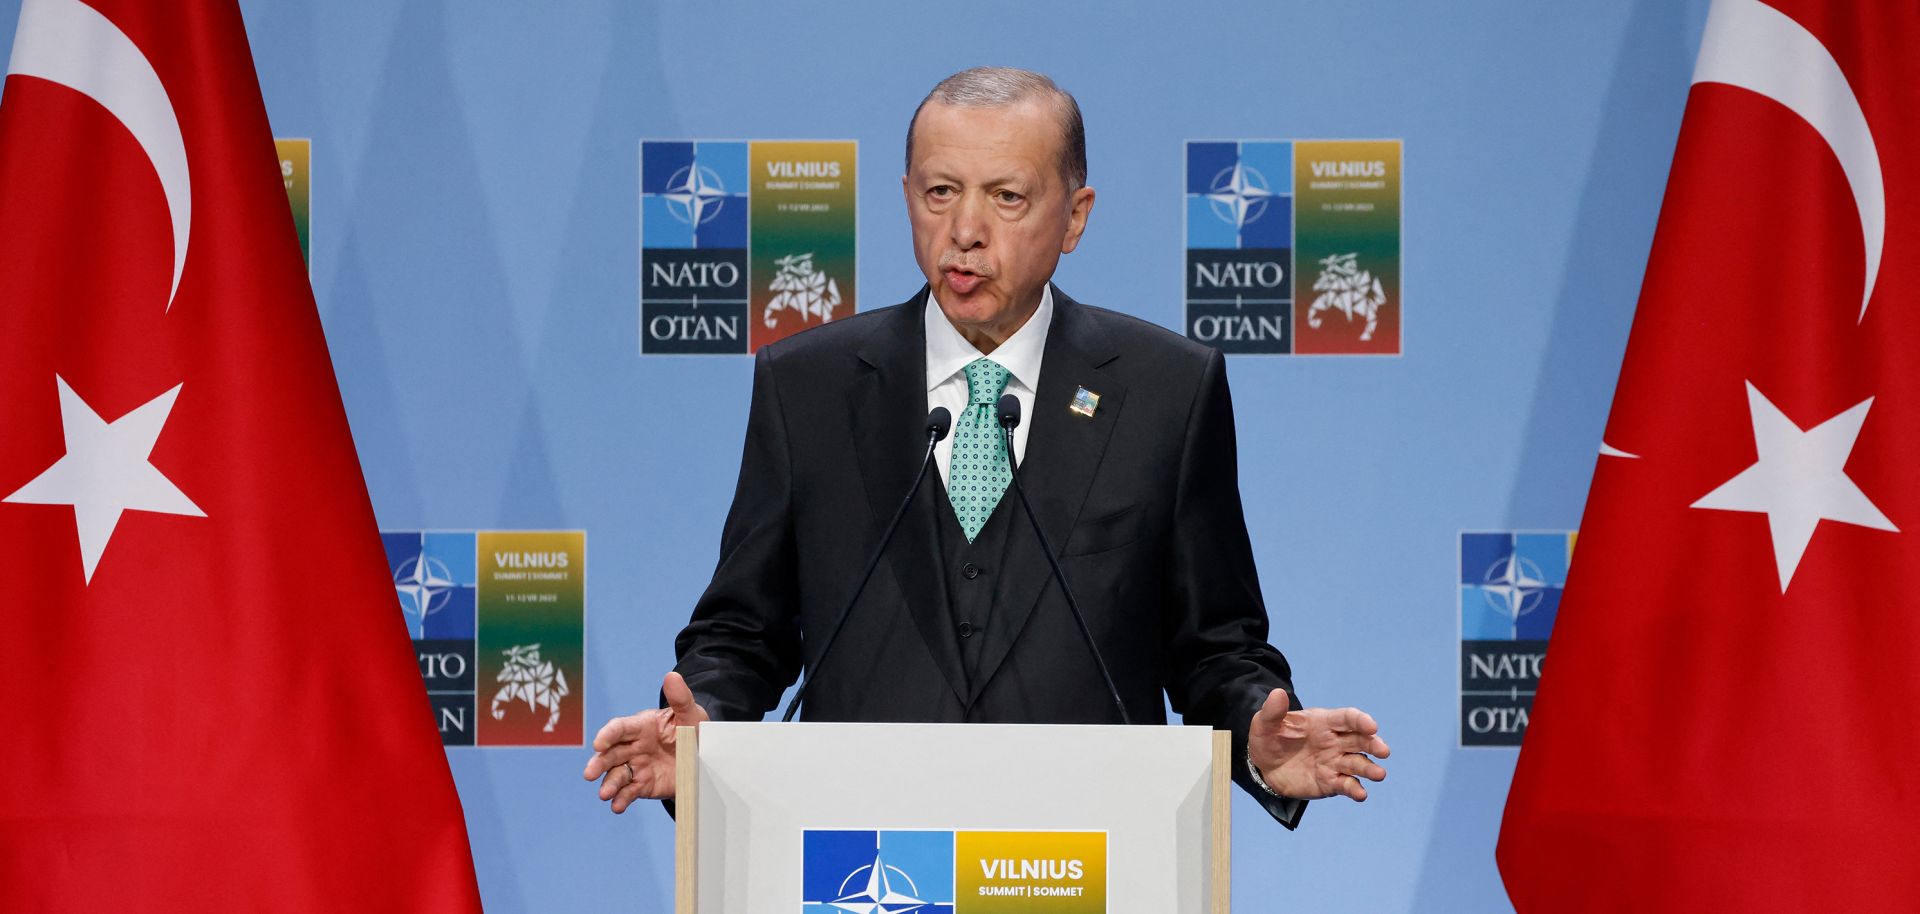 Turkish President Recep Tayyip Erdogan gives a press conference during the NATO Summit in Vilnius, Lithuania, on July 12, 2023.